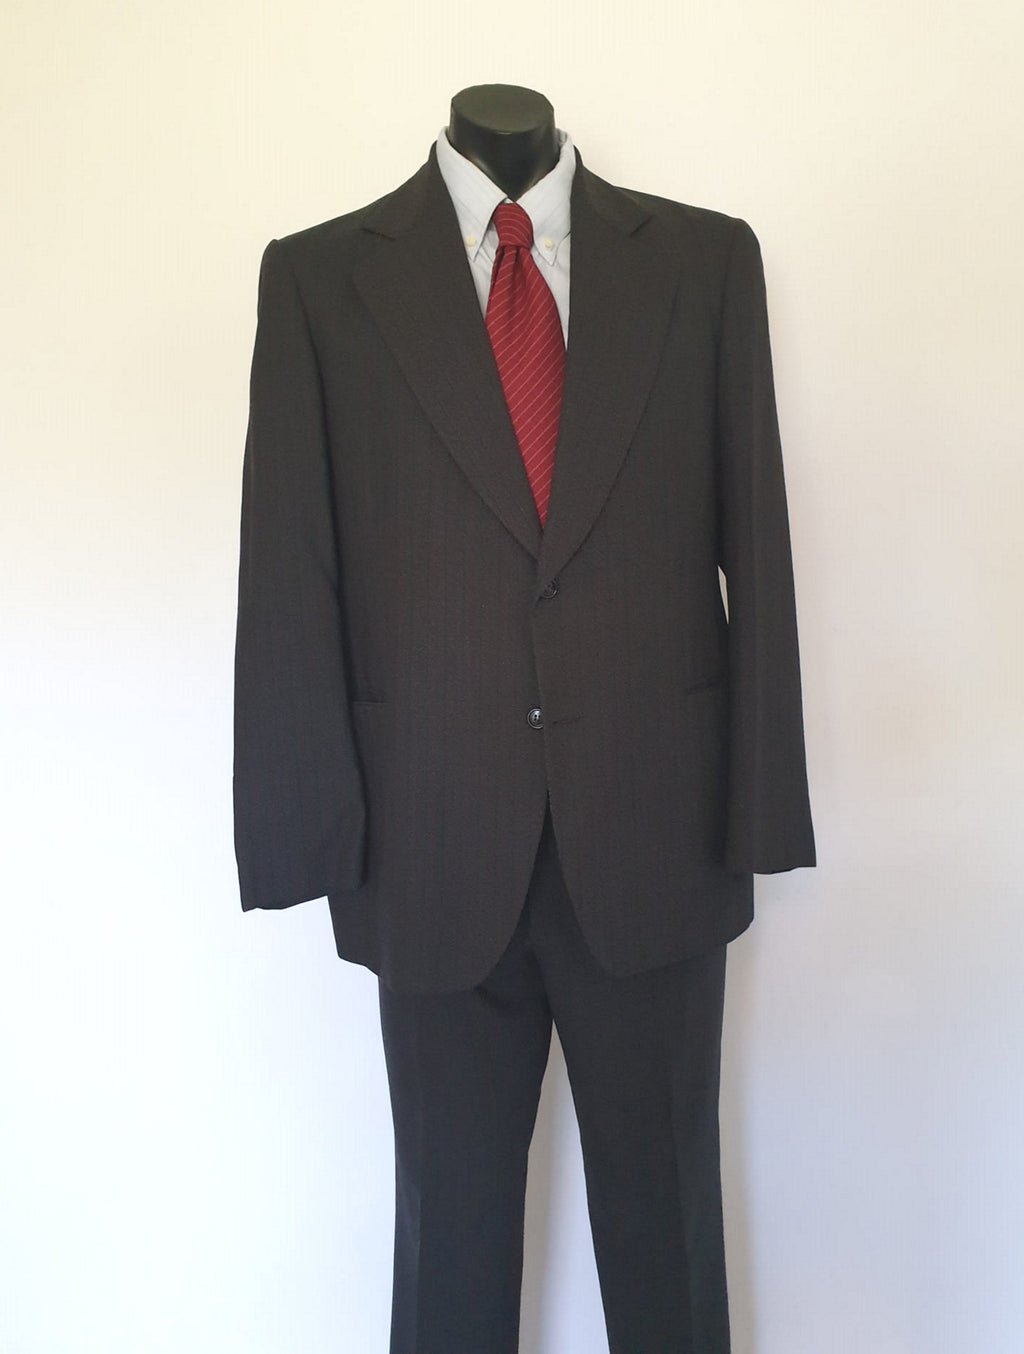 bud tingwell estate 1970s grey pin striped suit